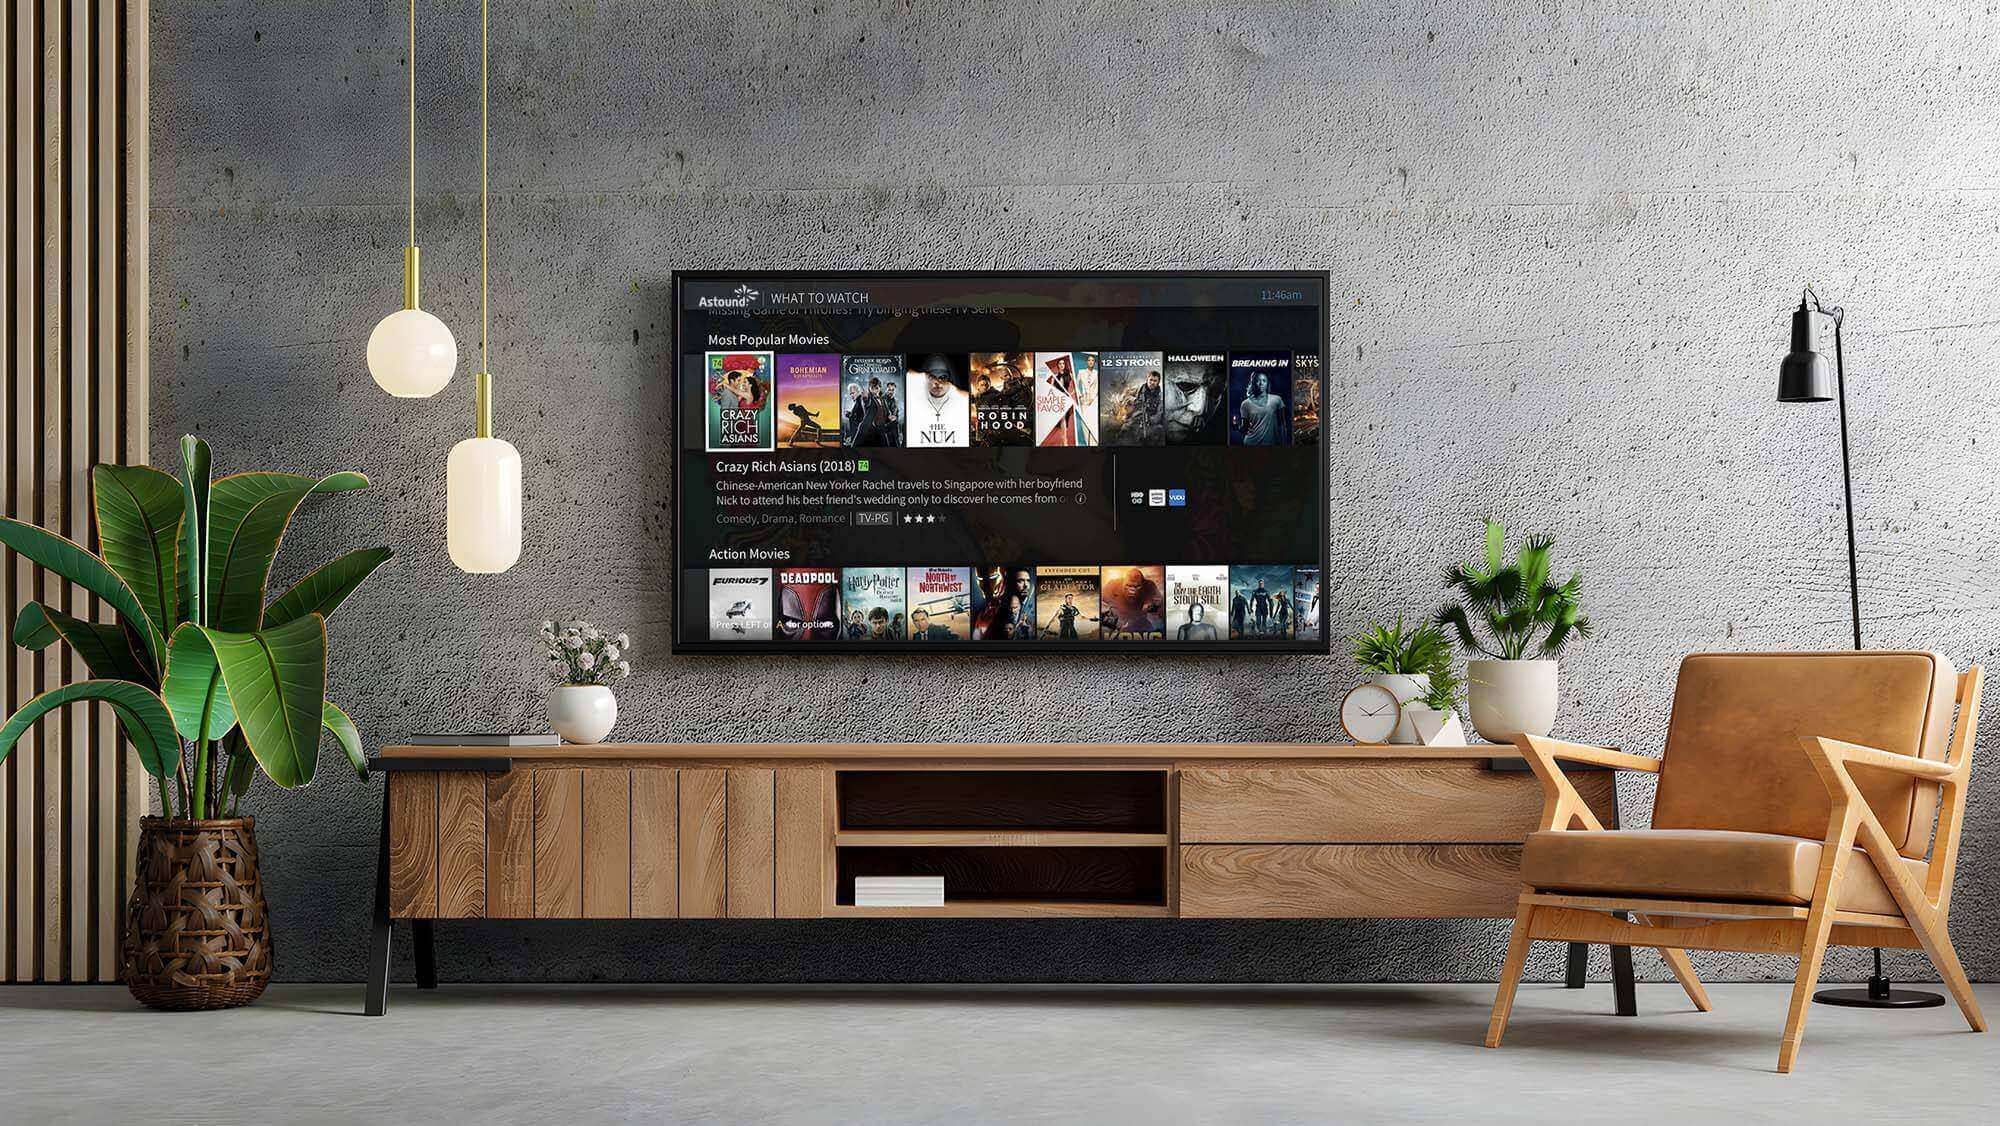 NOW TV – Stream Live TV and On Demand Channels